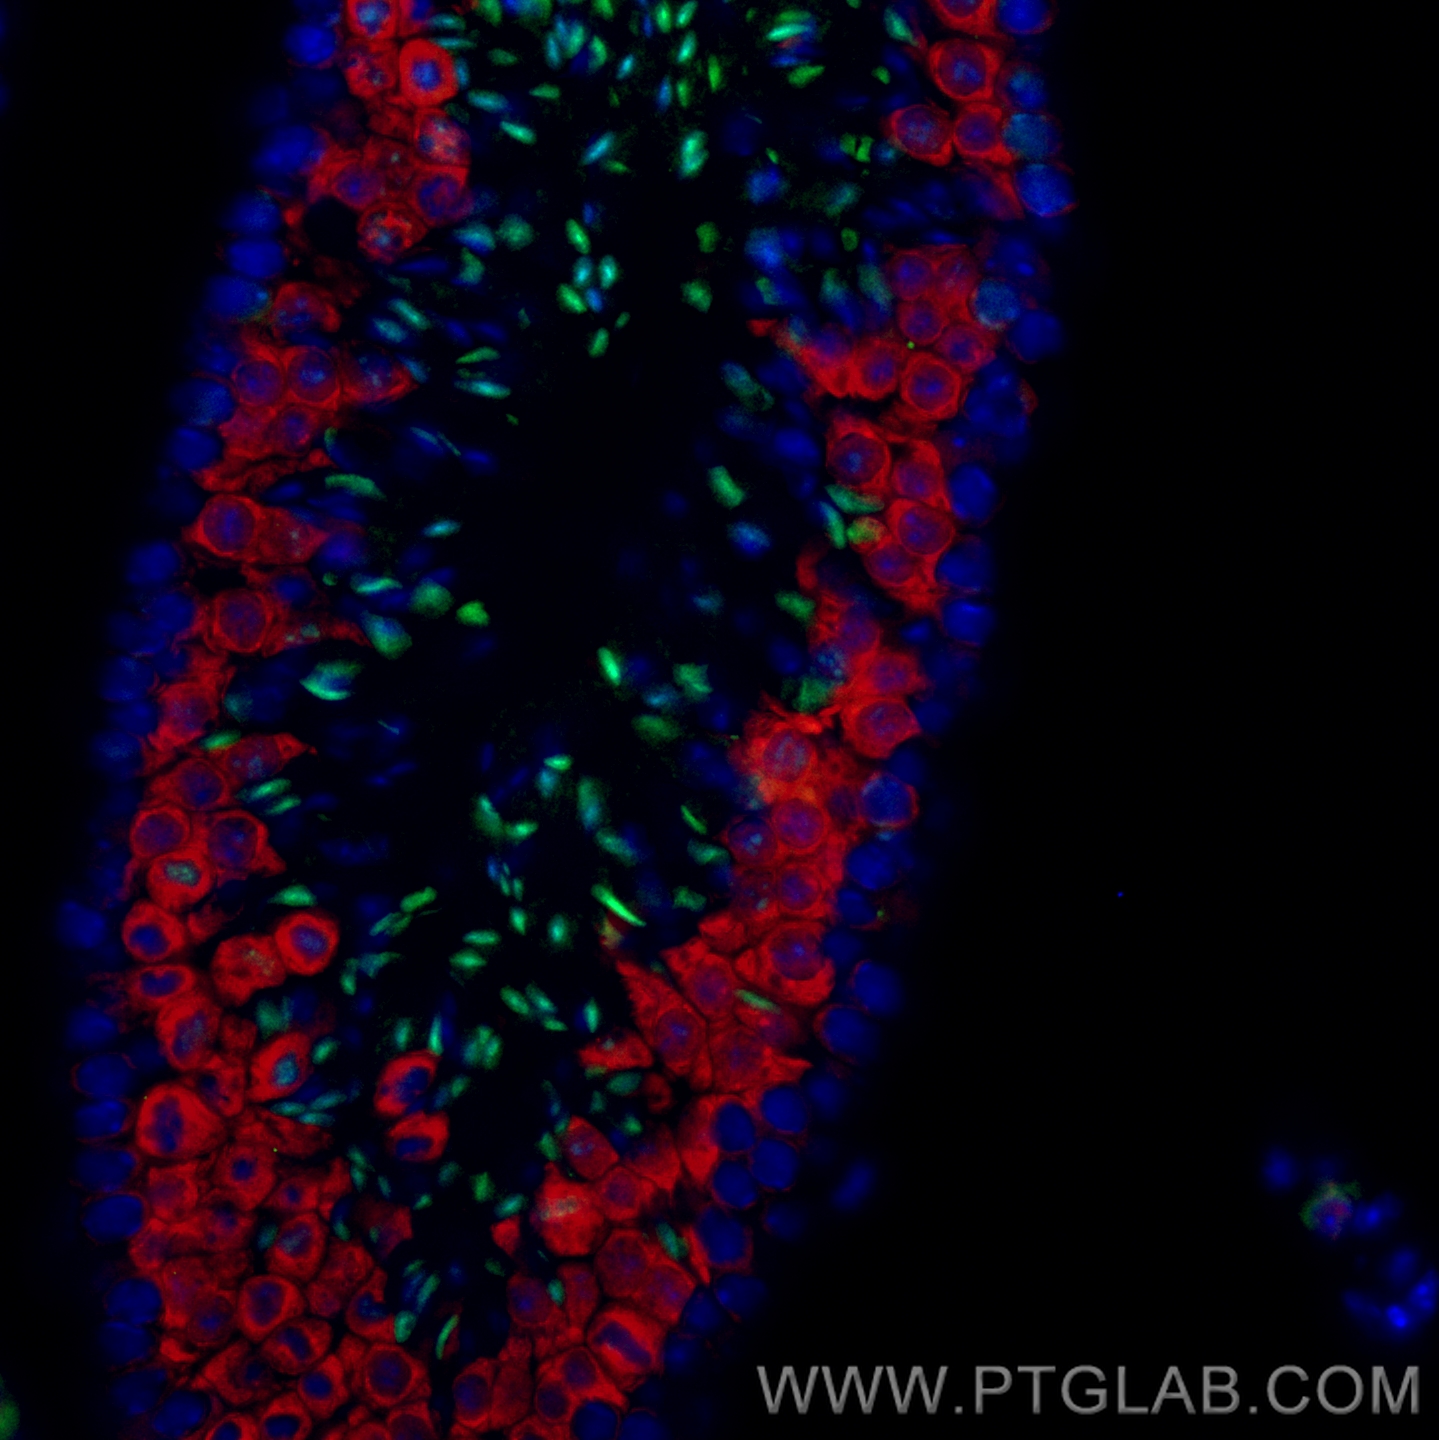 Immunofluorescence of mouse testis: FFPE mouse testis sections were stained with anti-TNP1 antibody (17178-1-AP) labeled with FlexAble Biotin Antibody Labeling Kit for Rabbit IgG (KFA007) and Streptavidin-488 (green), and anti-BOLL antibody (13720-1-AP) labeled with FlexAble Biotin Antibody Labeling Kit for Rabbit IgG (KFA007) and Streptavidin-594 (red).  Cell nuclei are stained with DAPI (blue). 